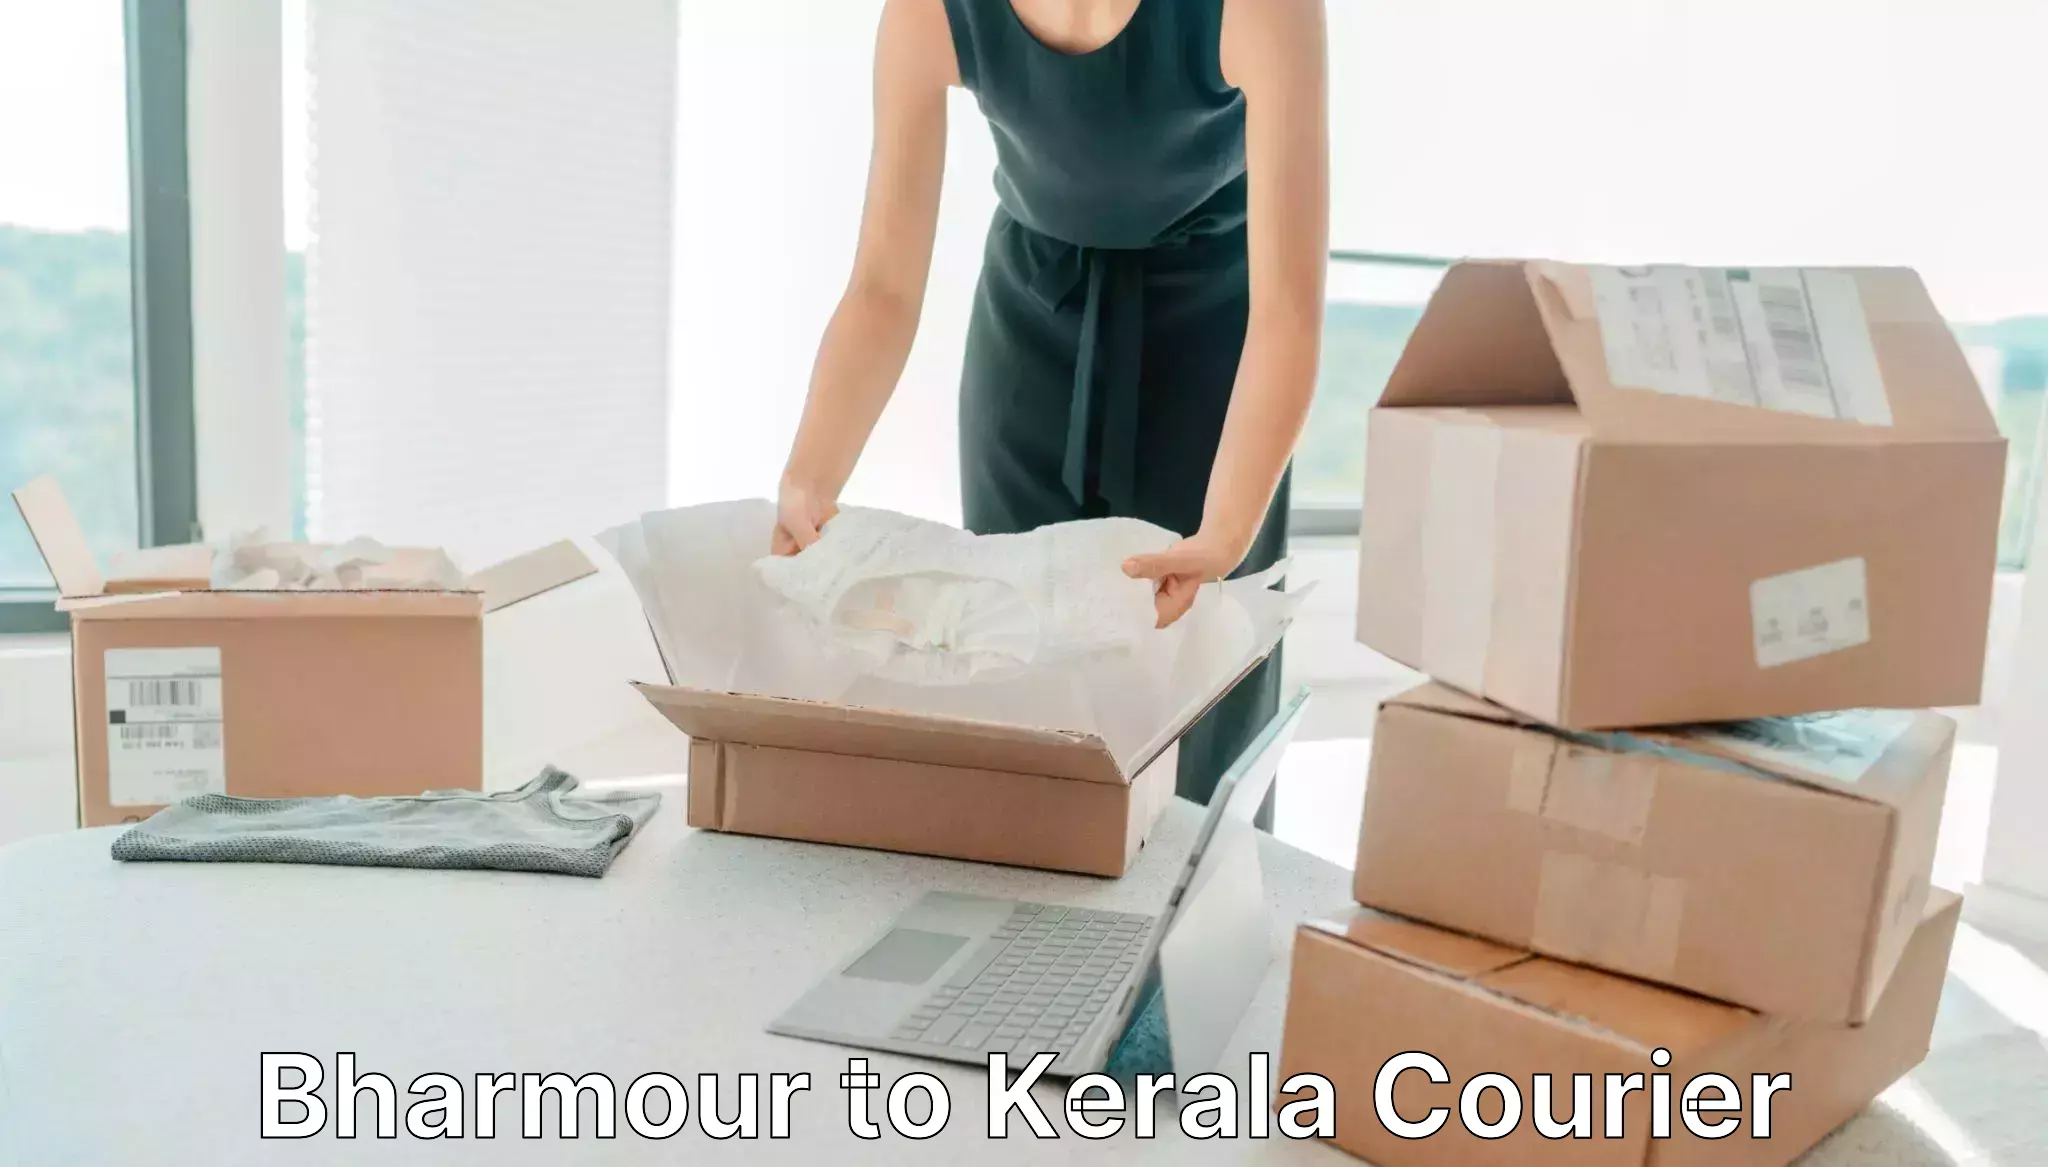 Flexible delivery scheduling Bharmour to Kerala